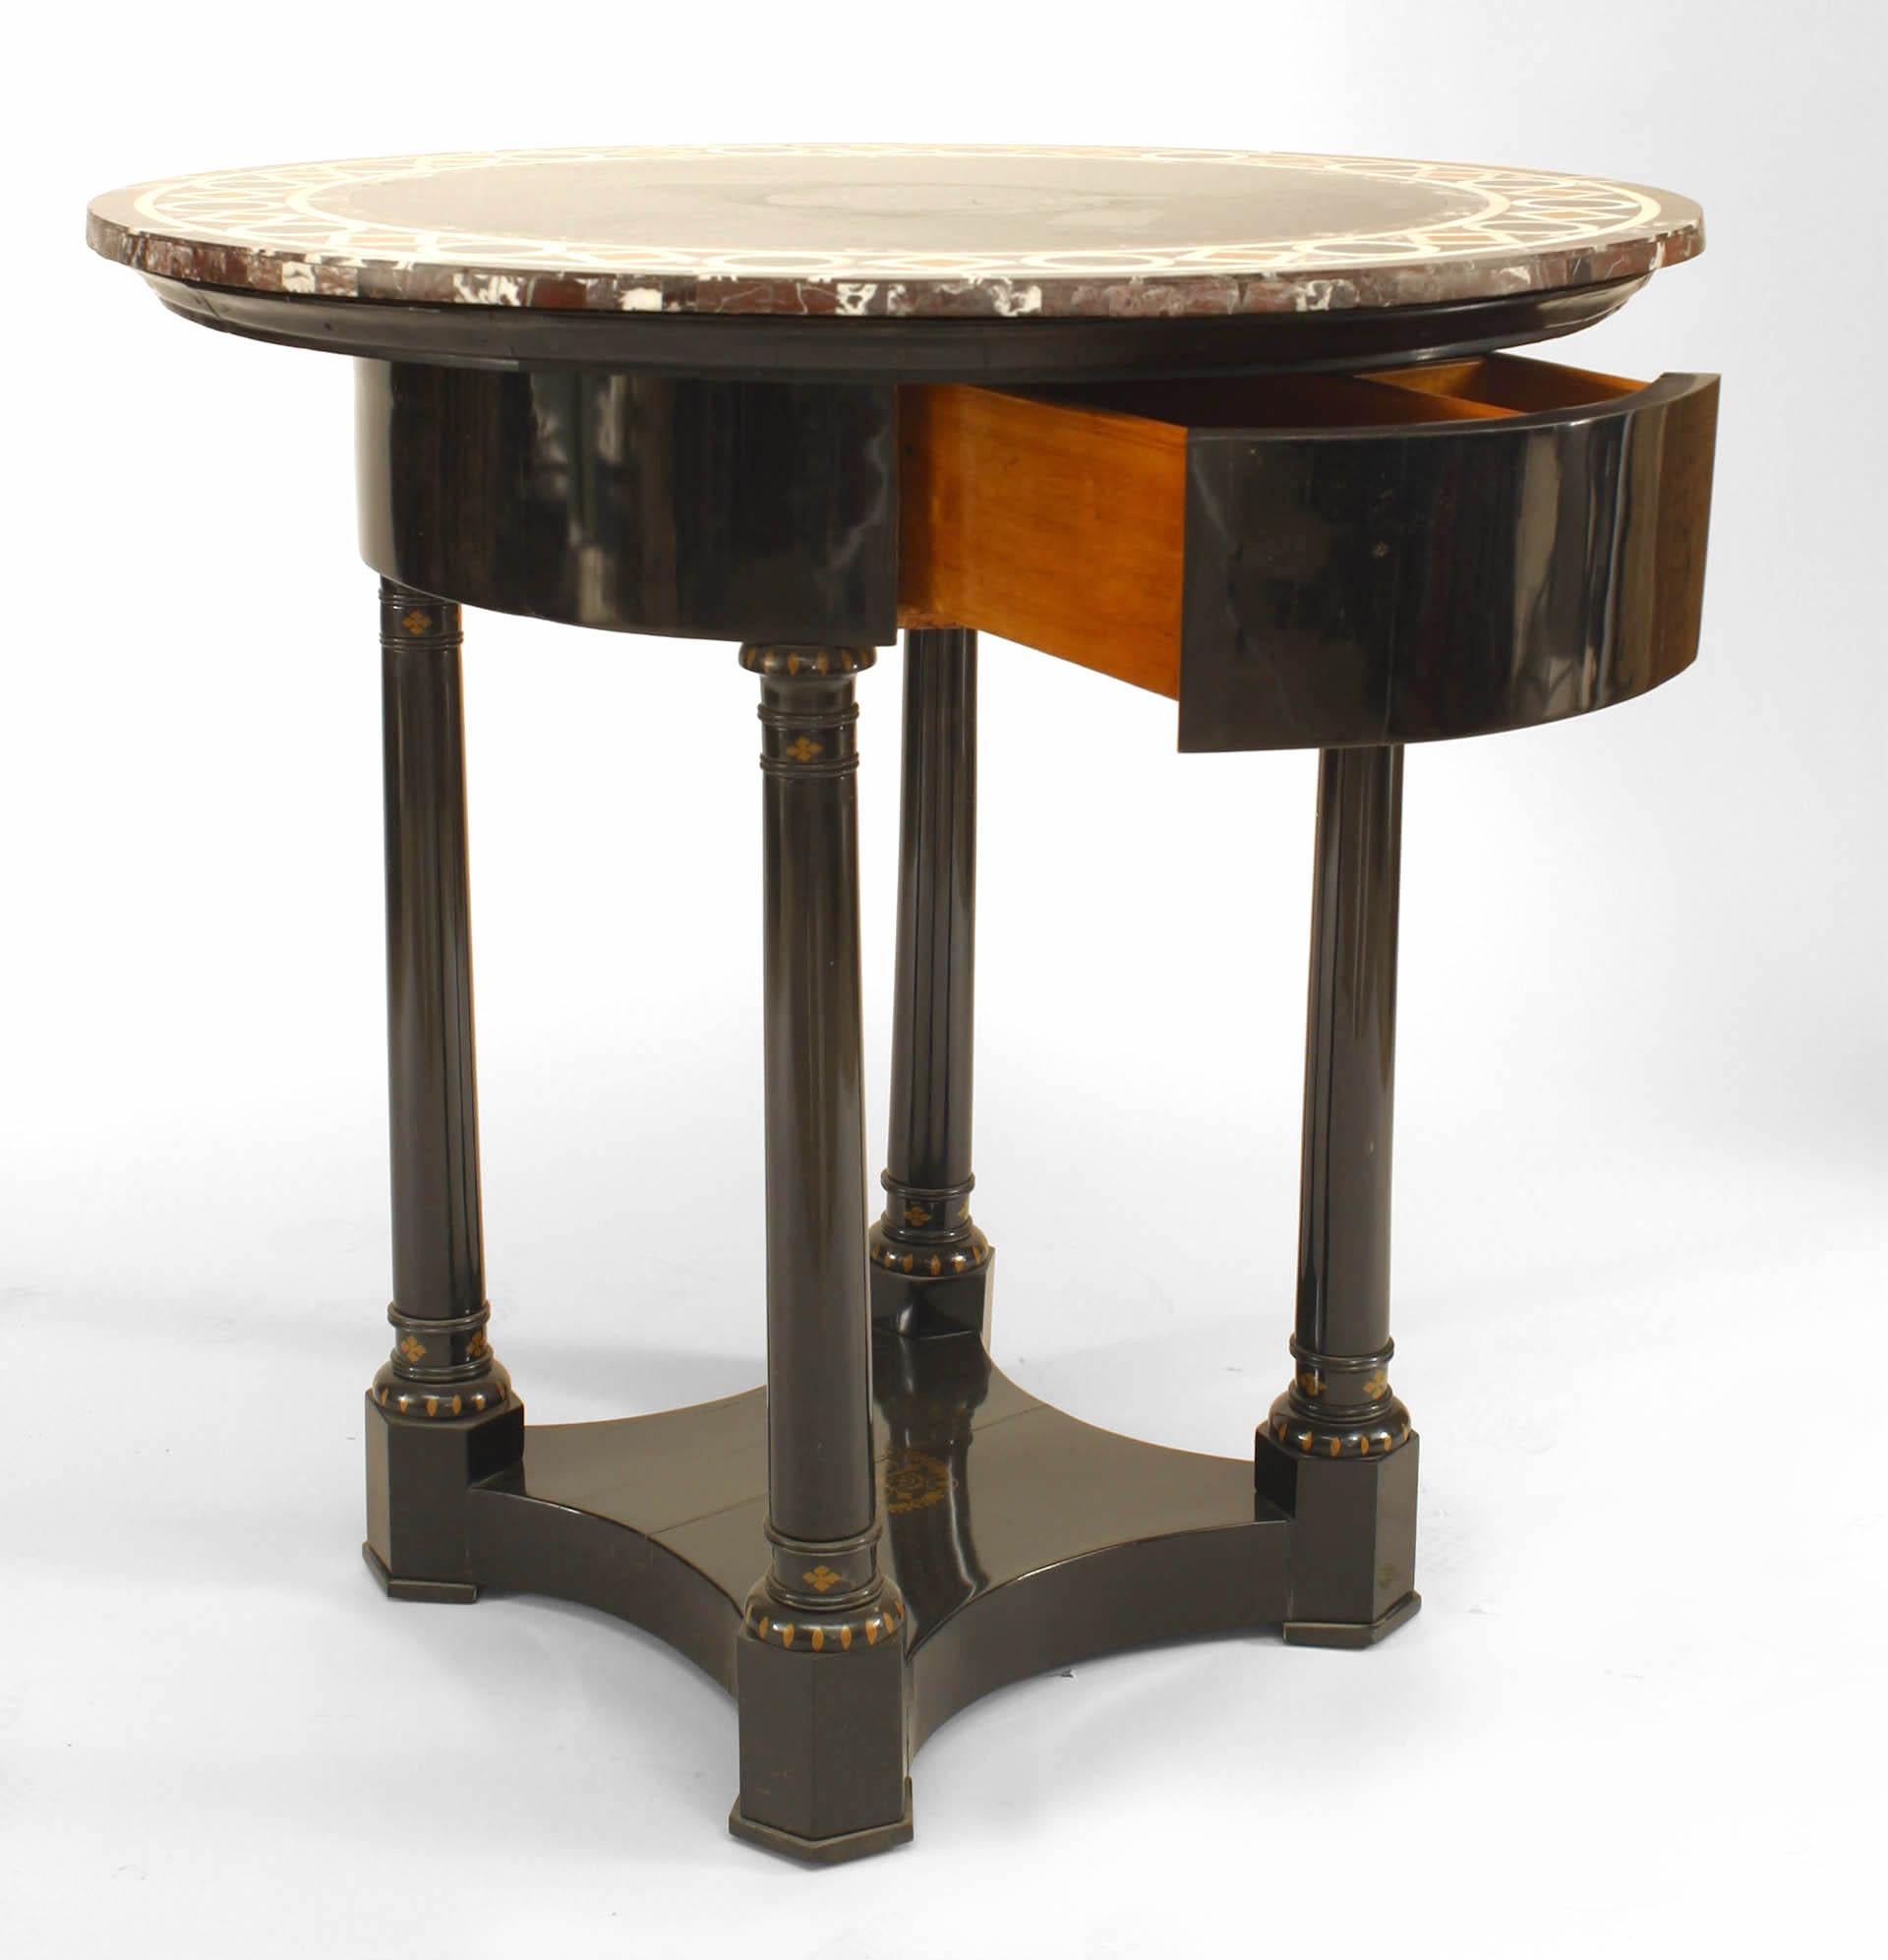 Austrian Biedermeier (circa 1820) round ebonized center table with inlaid marble top & drawer supported by 4 columns ending in a platform base with gold stenciled decoration.
